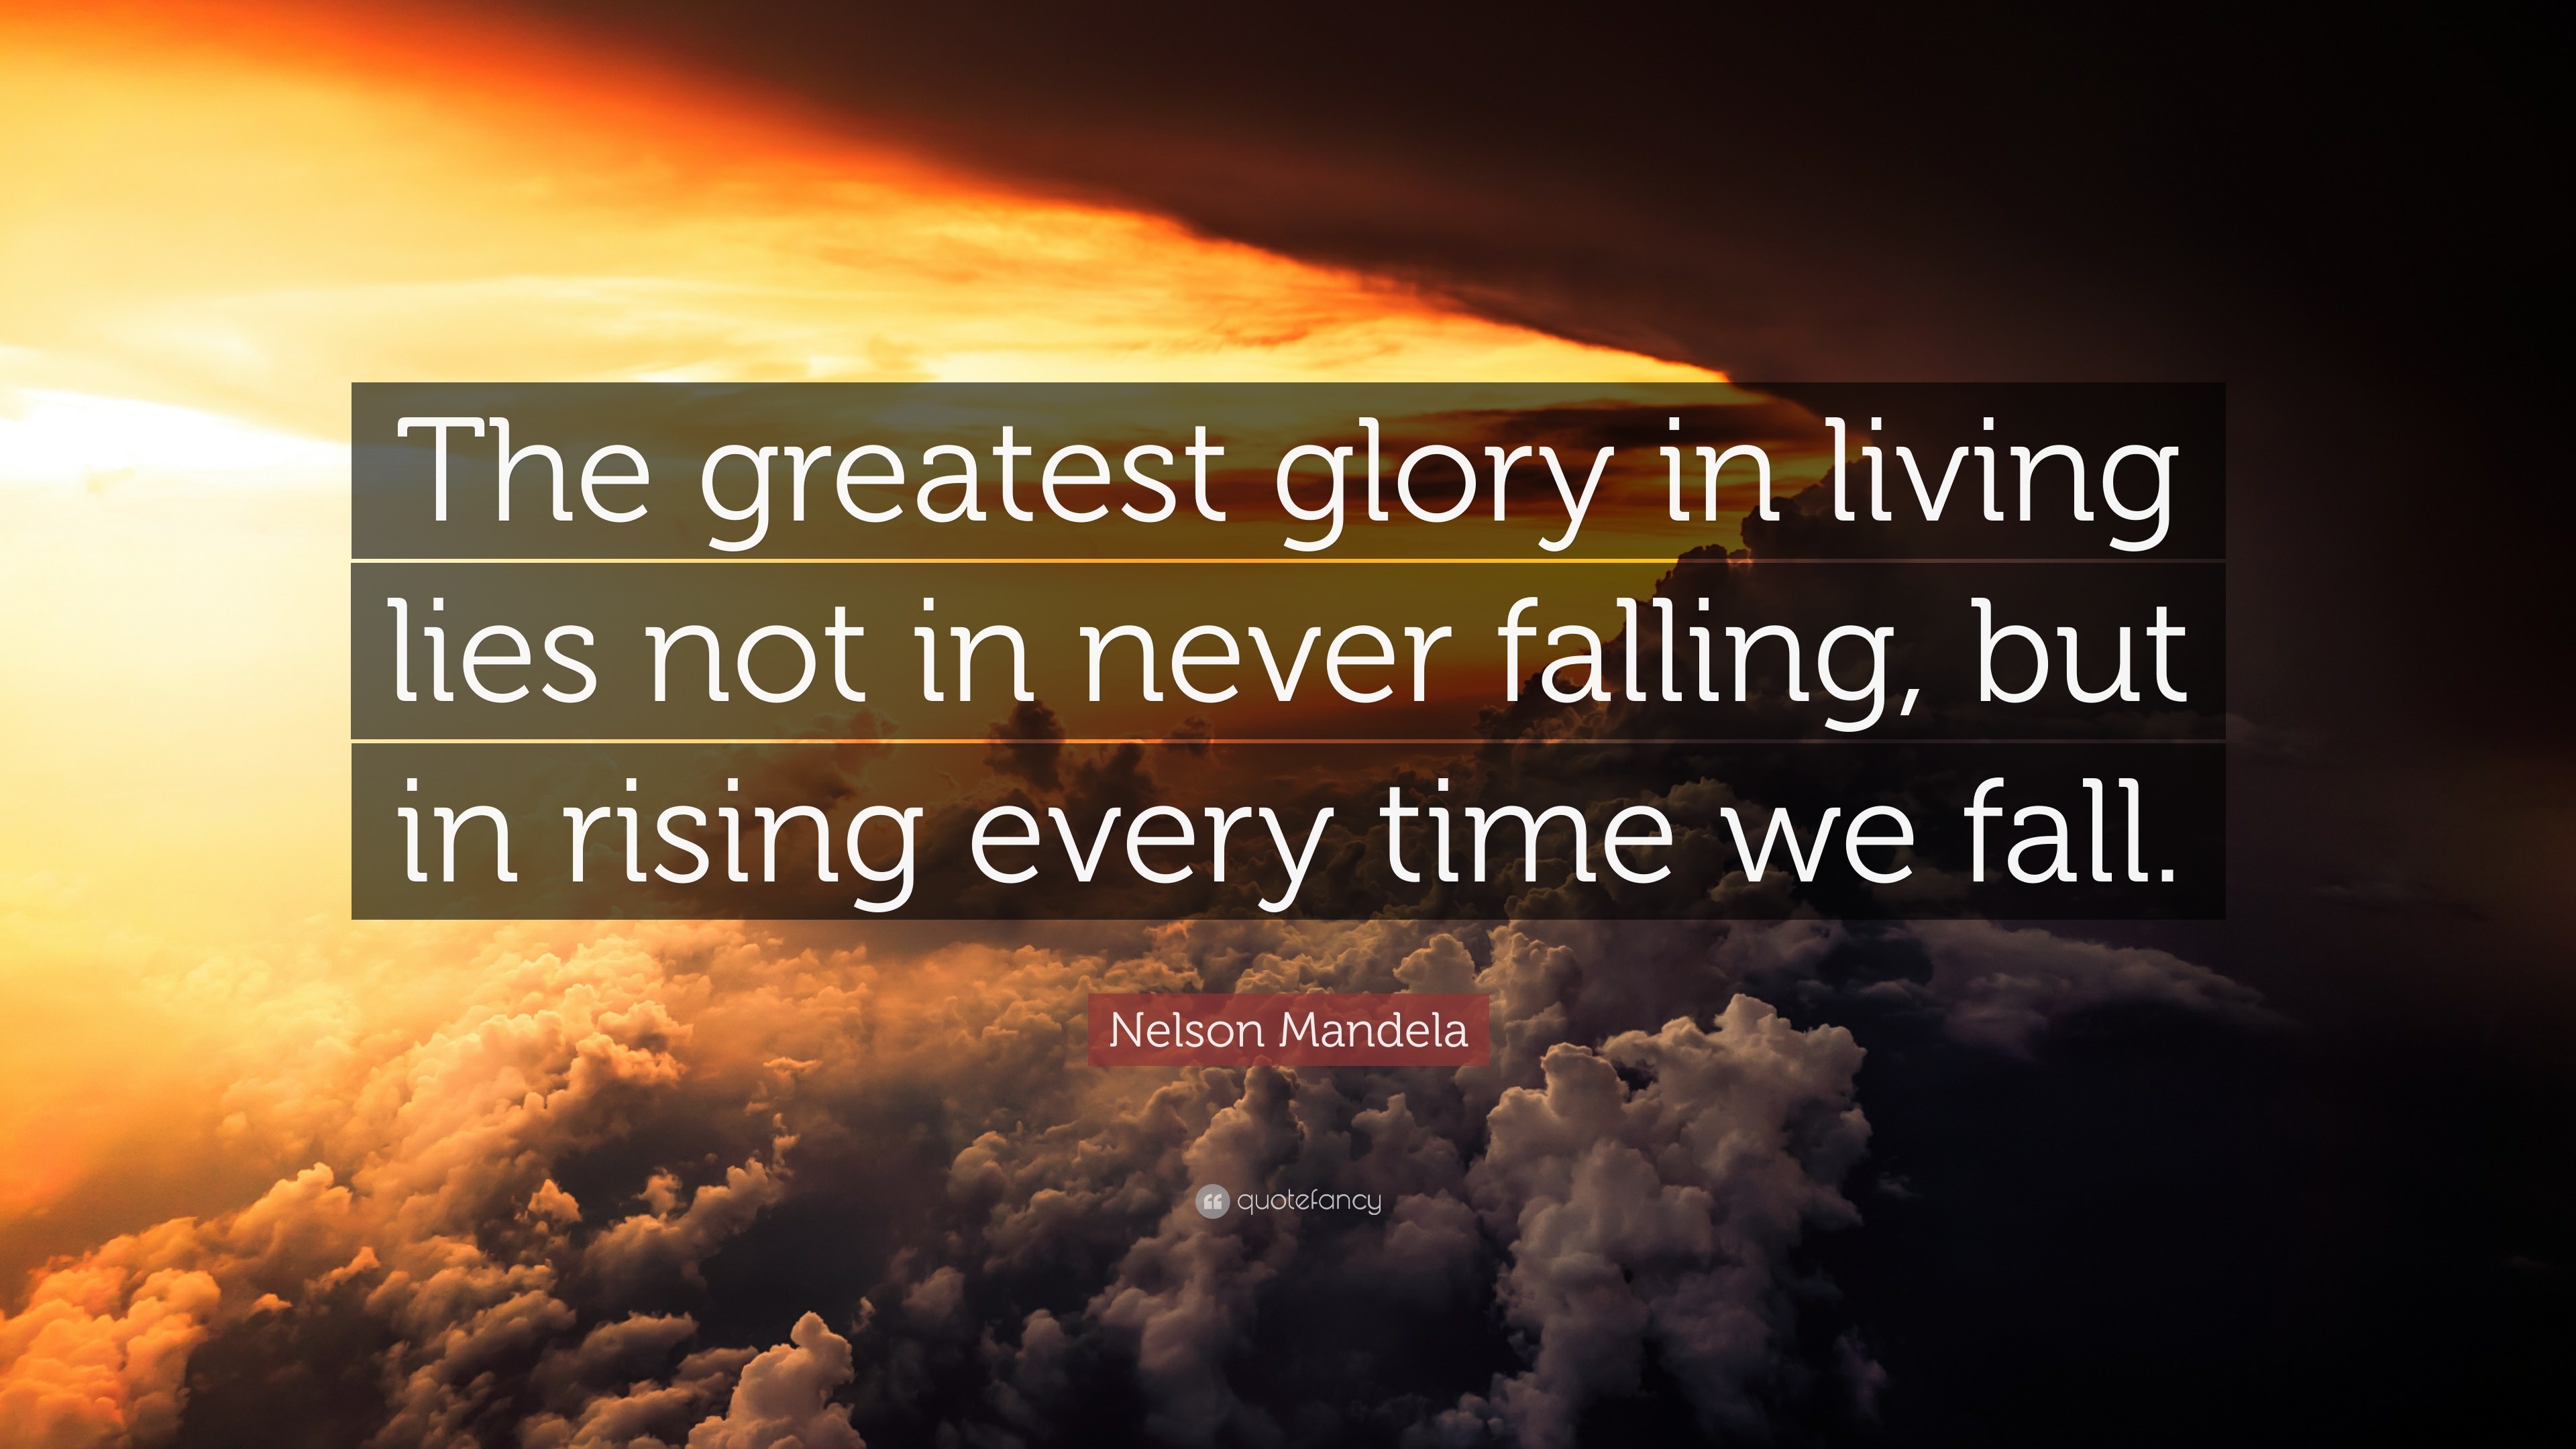 Nelson Mandela Quote “the Greatest Glory In Living Lies Not In Never